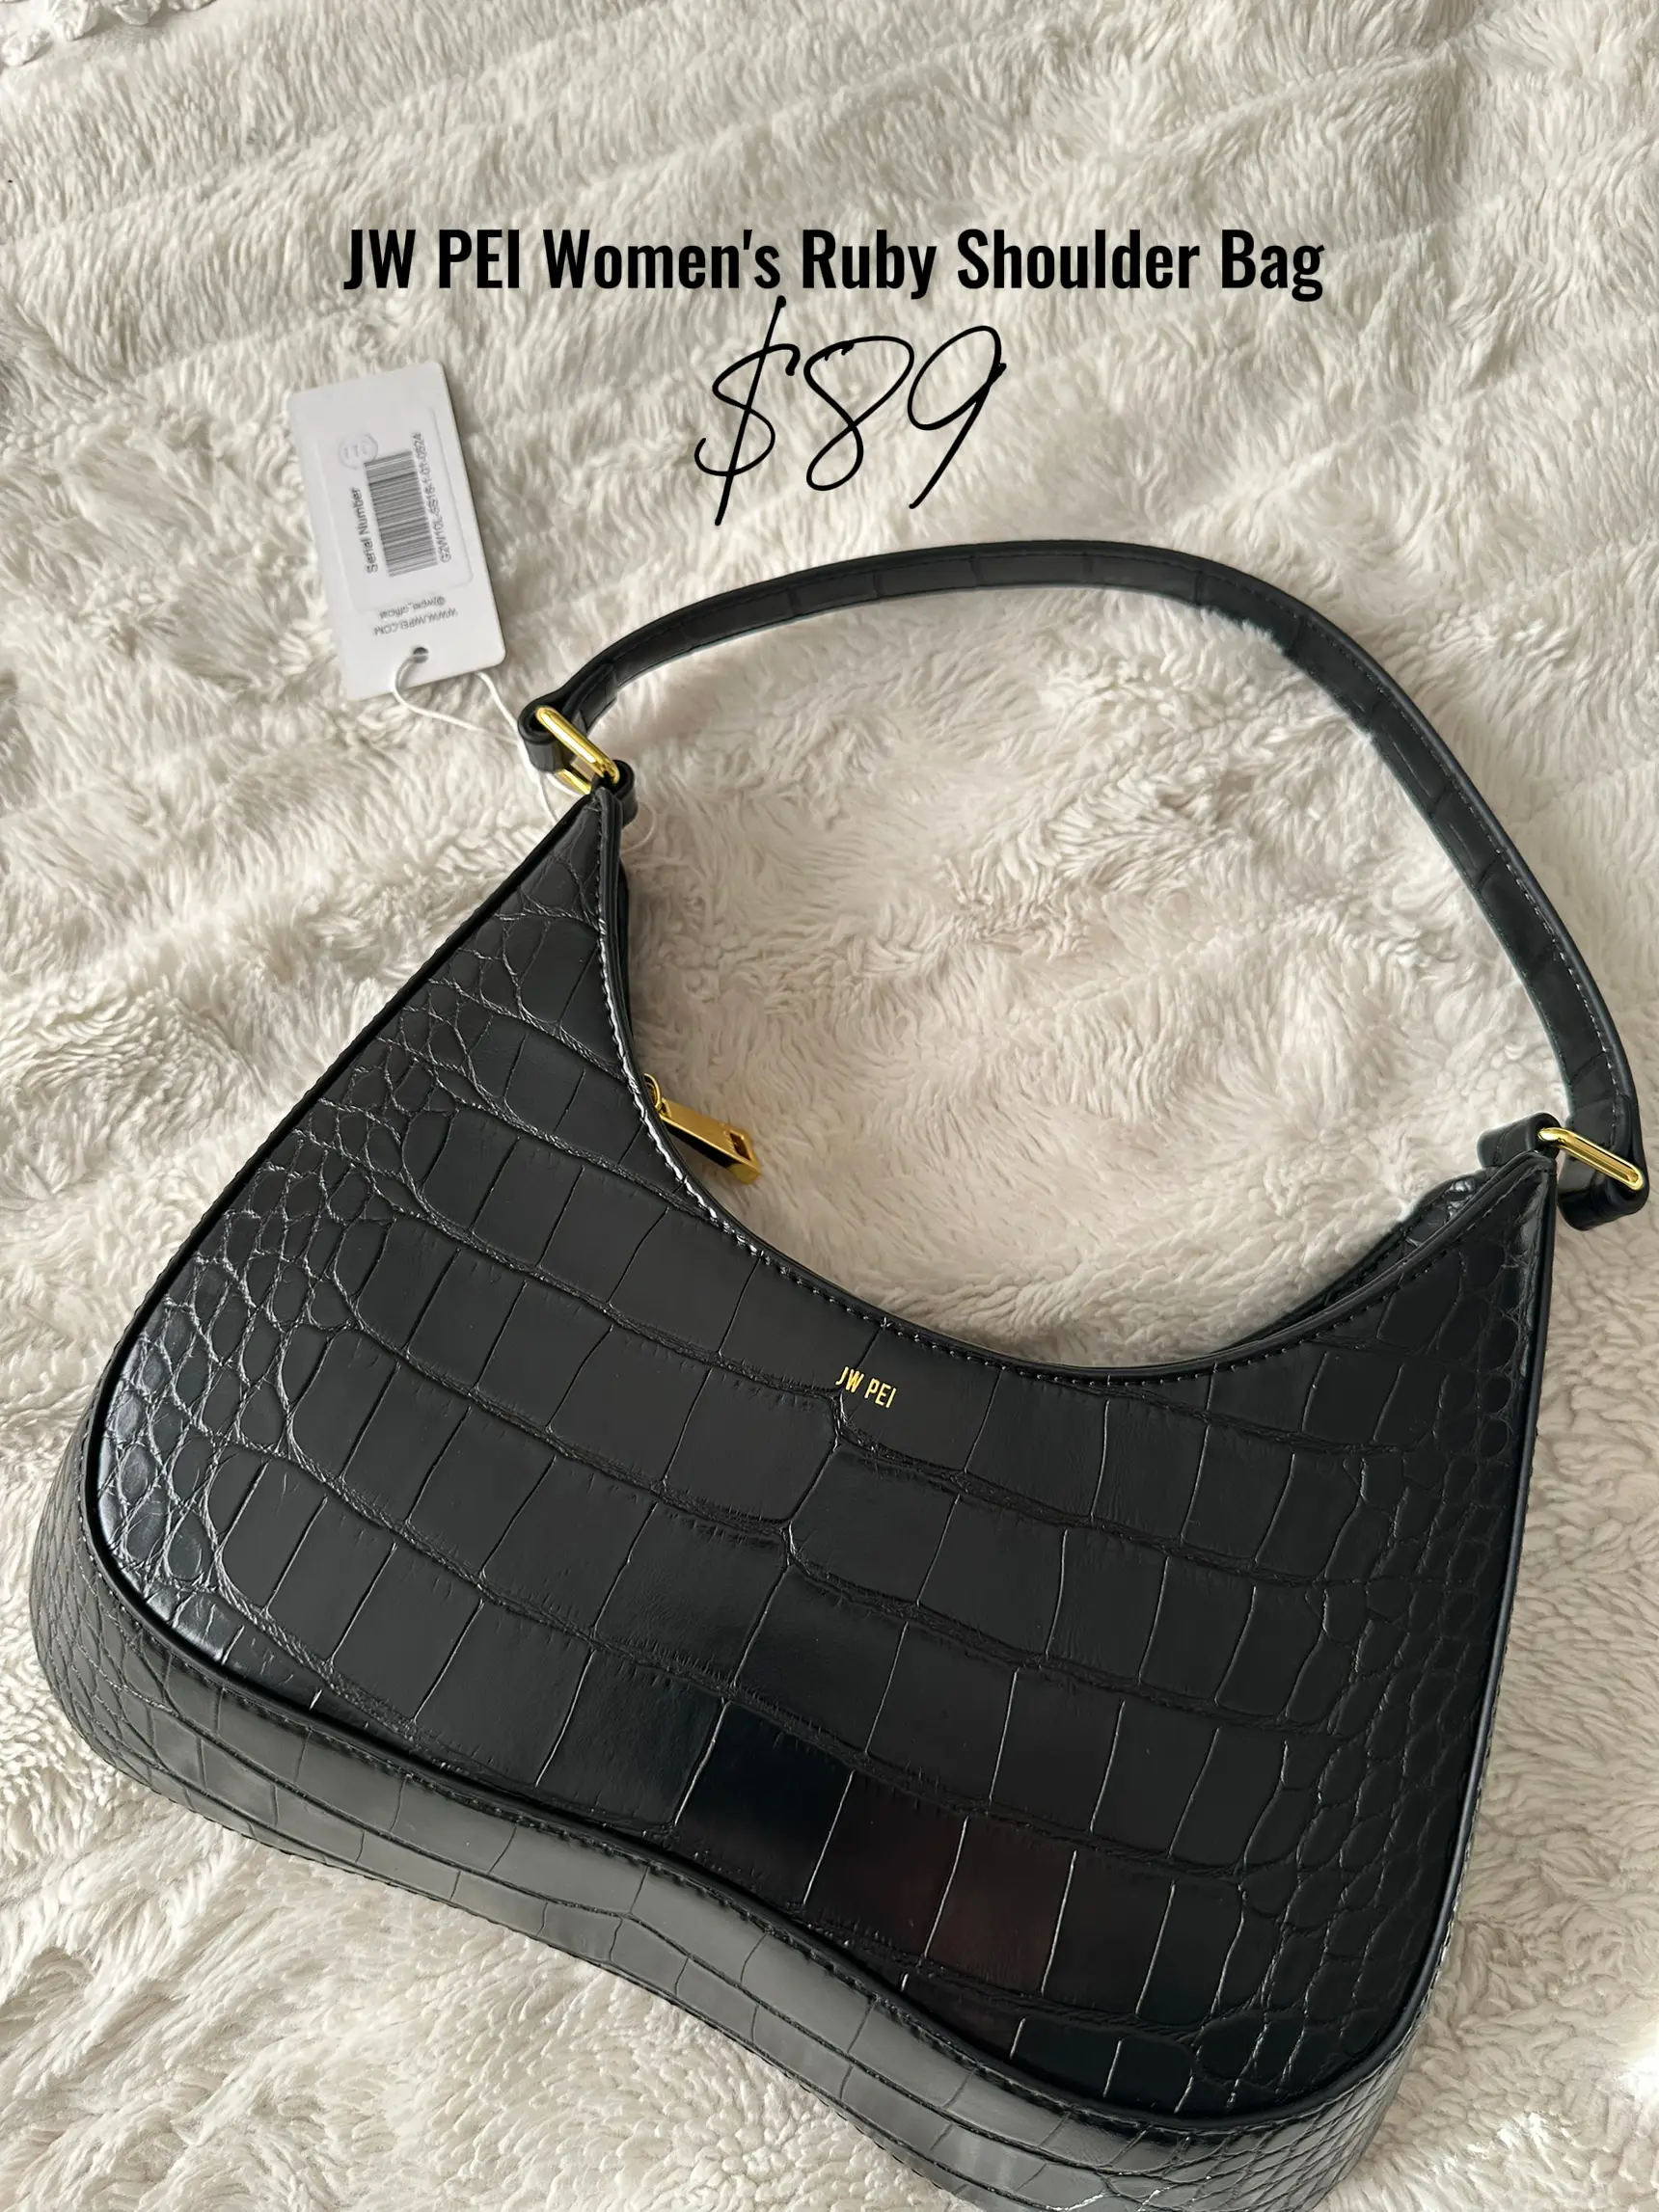 JW PEI RUBY BAG REVIEW  Bag comparison, what can fit inside 